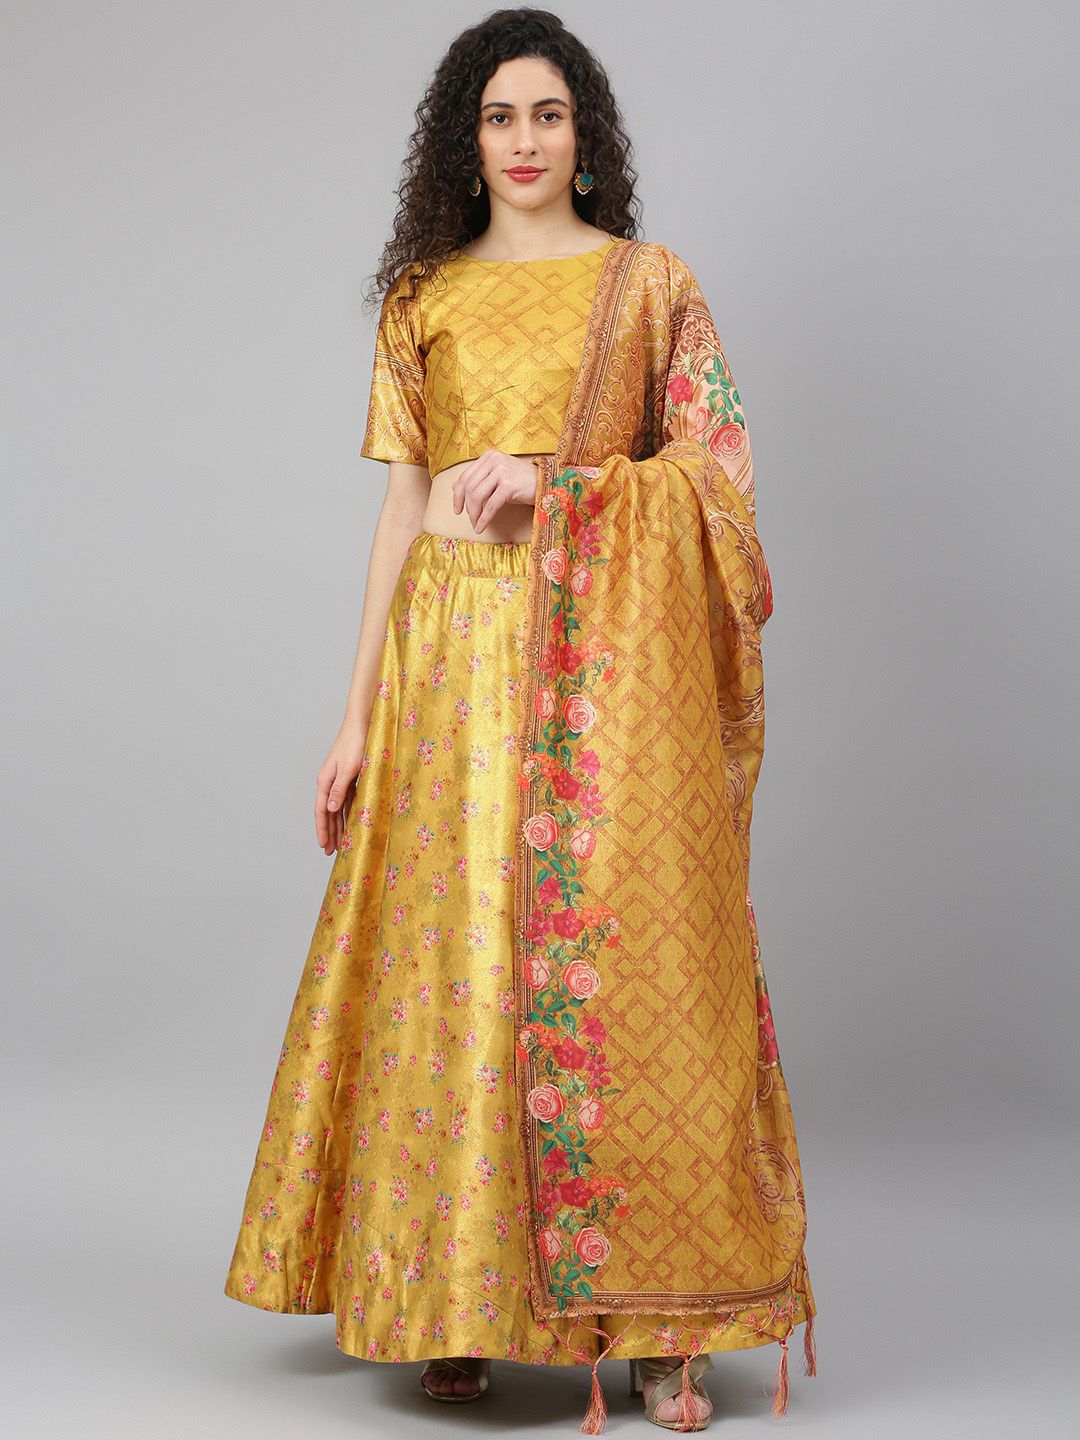 SHUBHVASTRA Yellow & Pink Printed Semi-Stitched Lehenga & Unstitched Blouse With Dupatta Price in India